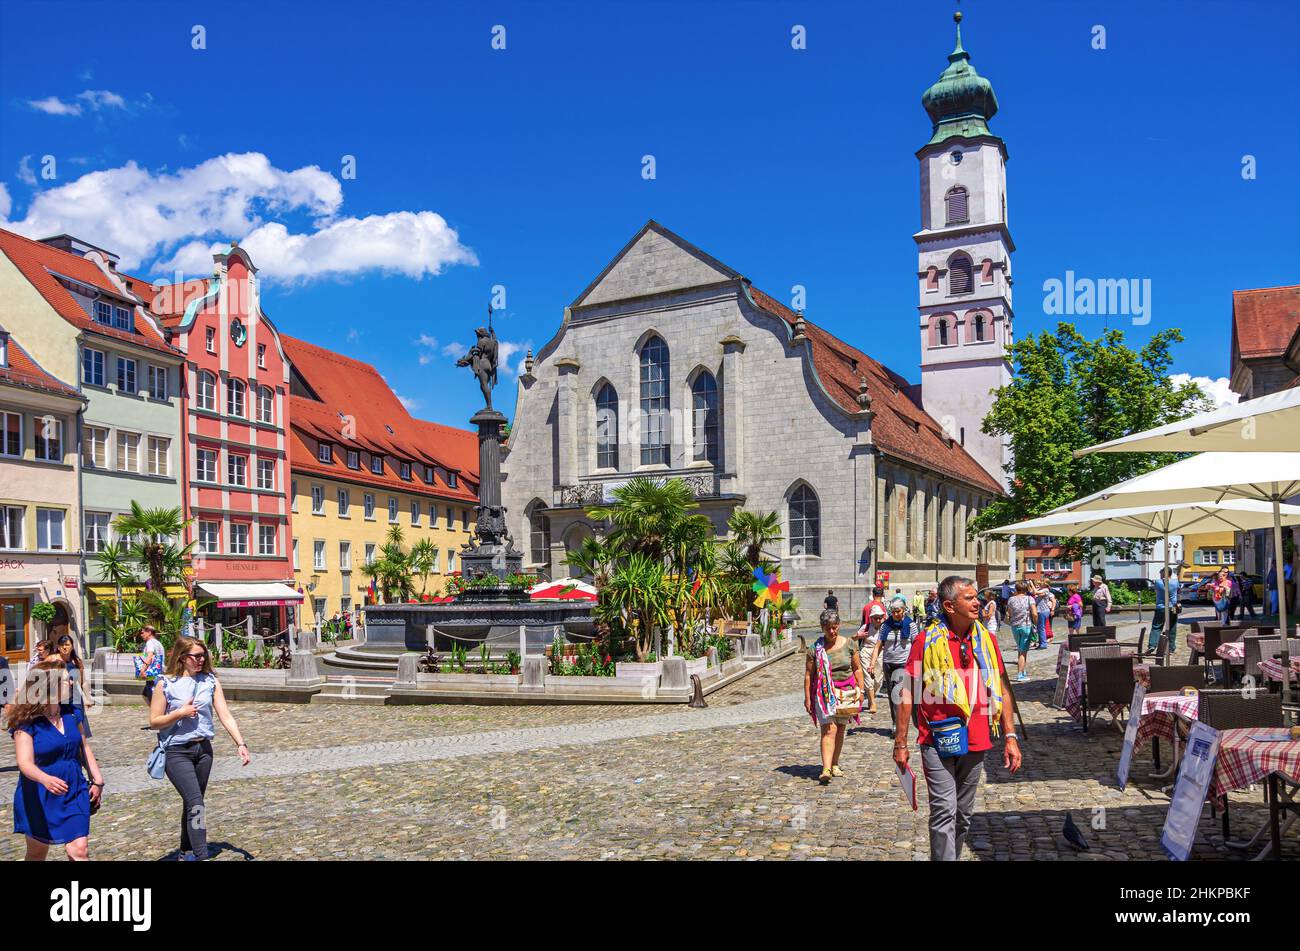 Lindau in Lake Constance, Bavaria, Germany, Europe: Bustling market square scene in front of Neptune Fountain and Church of St. Stephan. Stock Photo